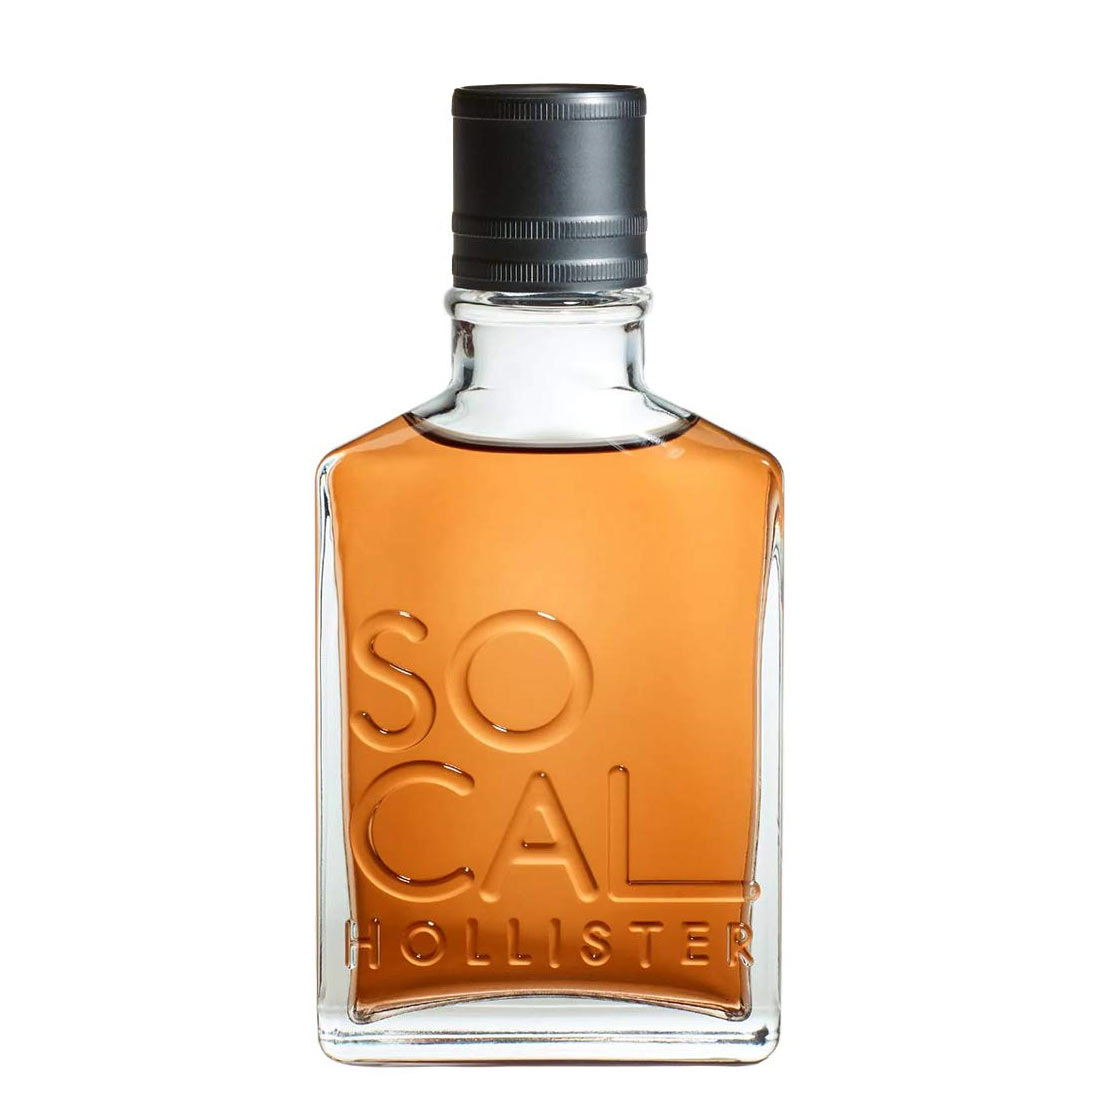 Hollister SoCal Cologne by Hollister @ Perfume Emporium Fragrance